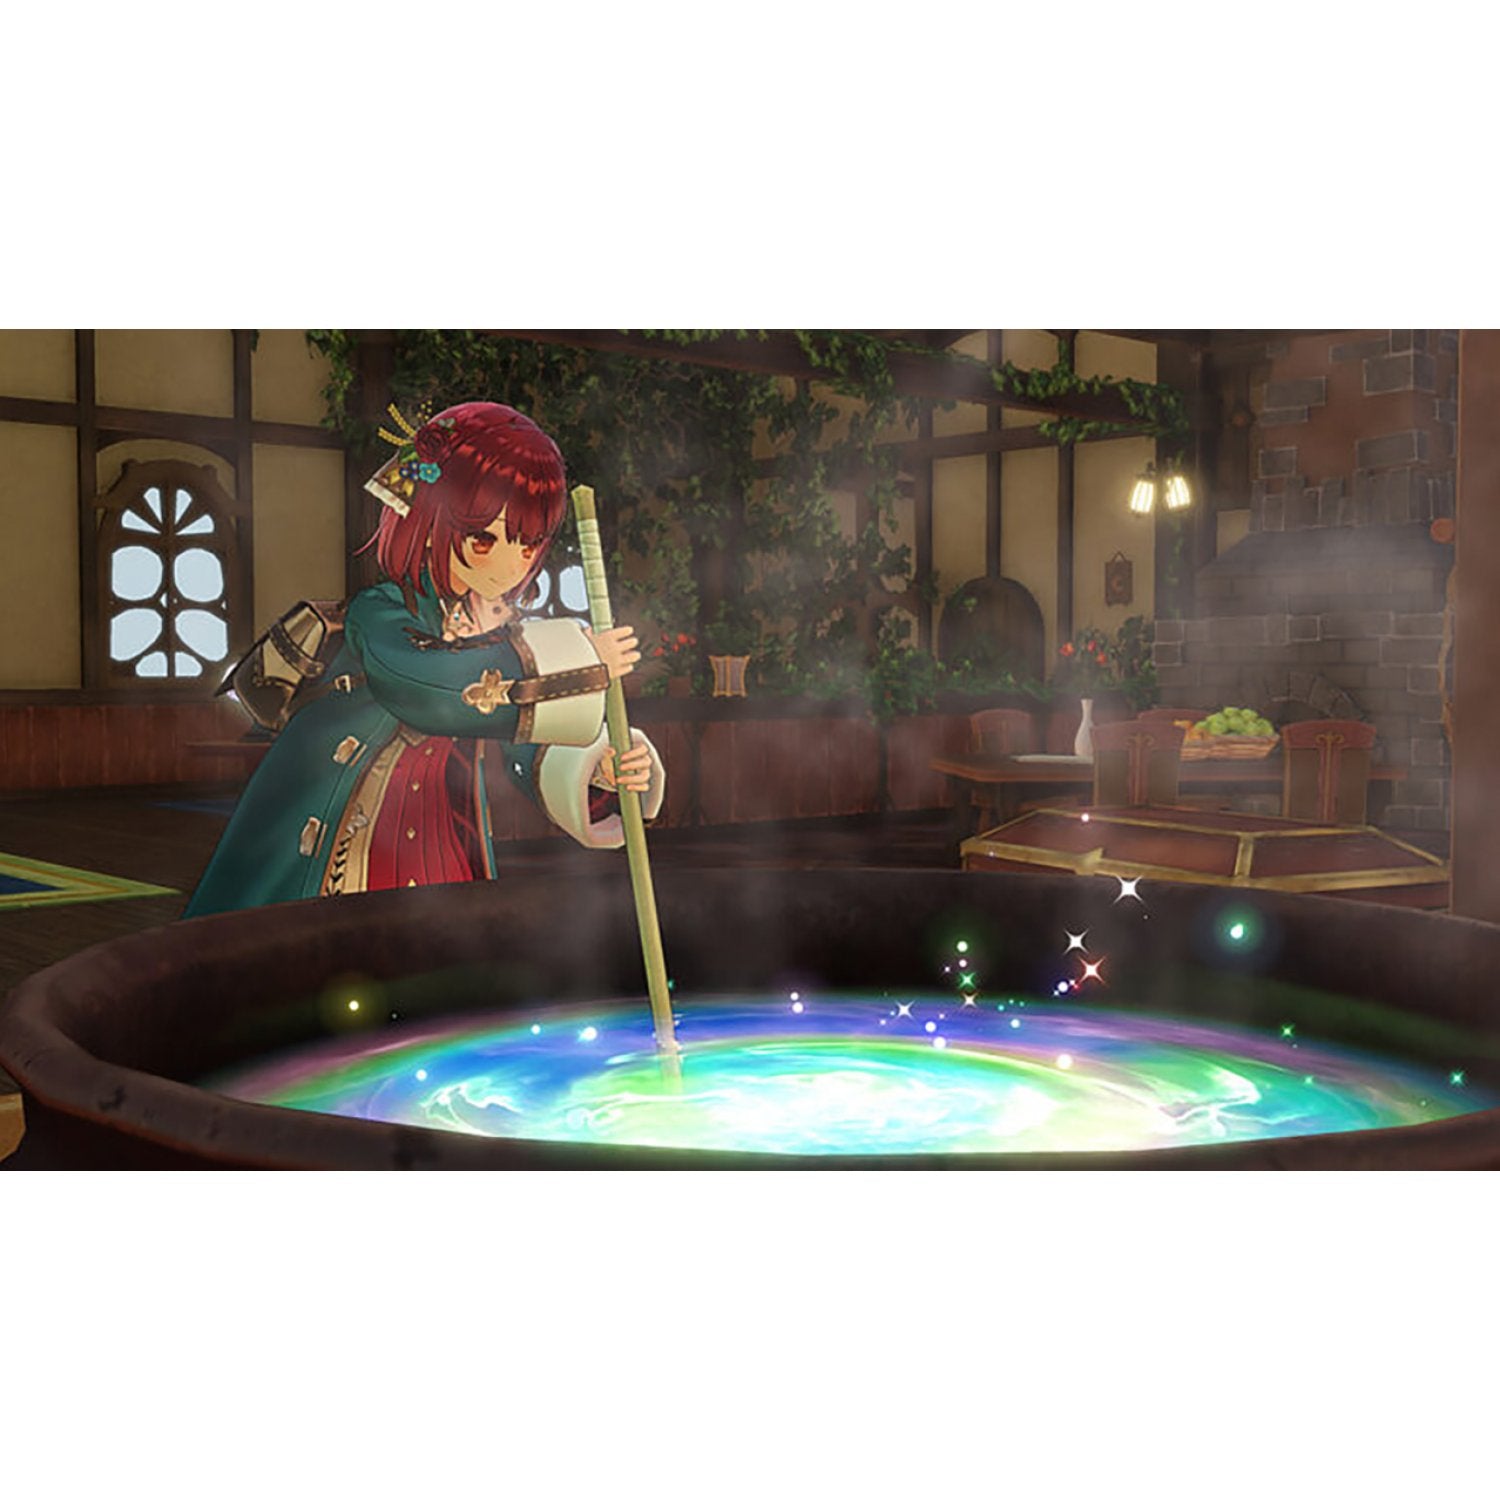 NSW Atelier Sophie 2: The Alchemist of the Mysterious Dream